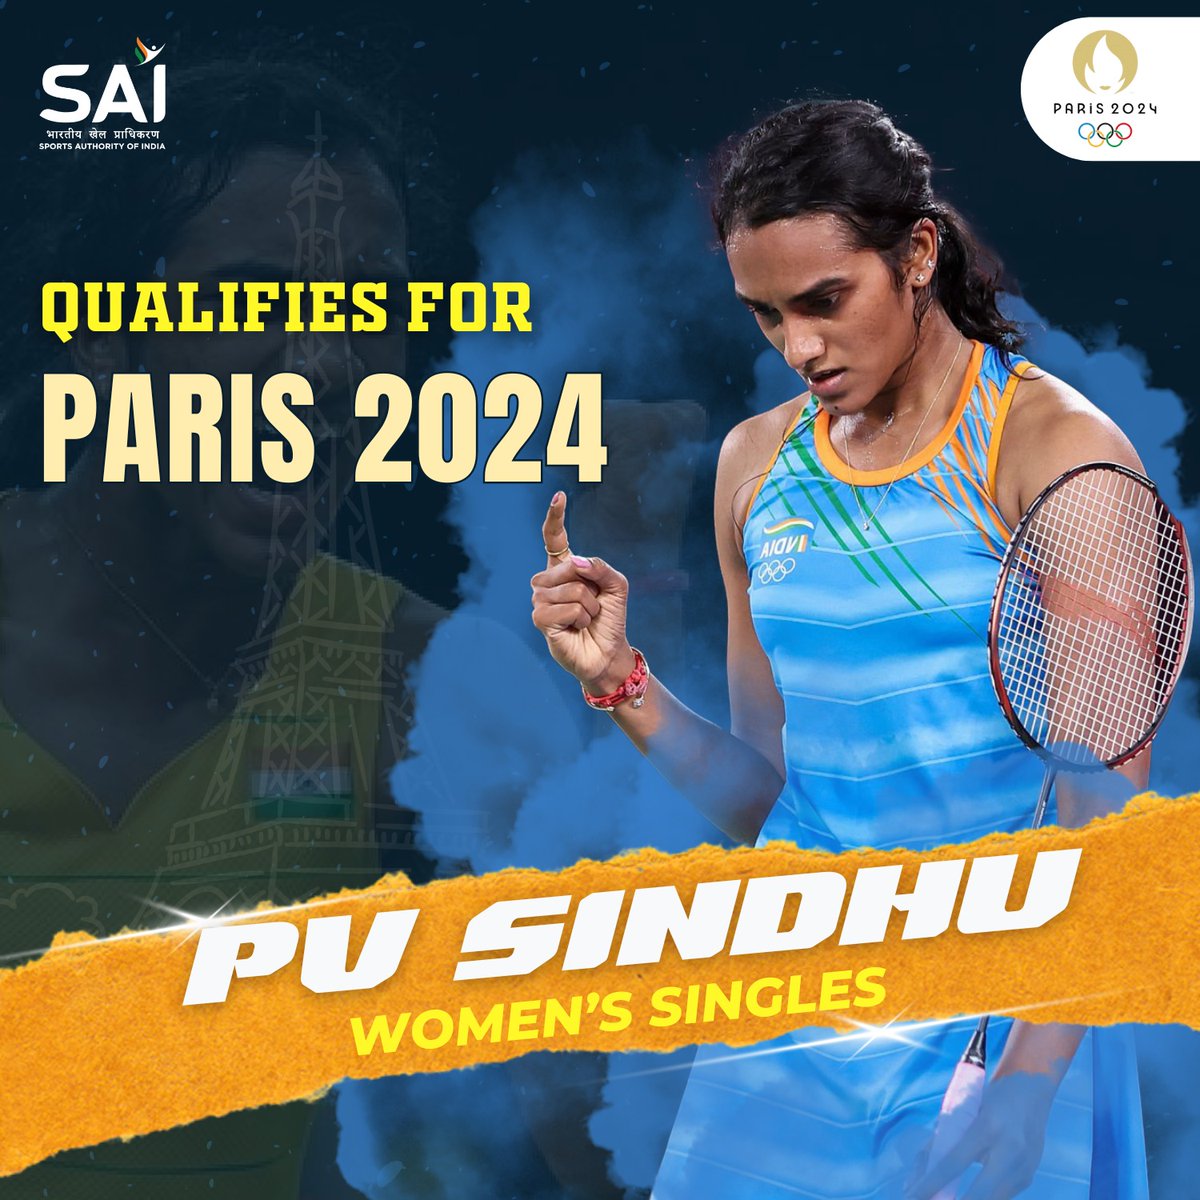 Seven shuttlers to represent India across four categories in #2024ParisOlympics. 

Two-time Olympic medalist #PV Sindhu will again lead India's challenge in the women's category where she is the only Indian entrant. 

Star pairing of Satwiksairaj Rankireddy & Chirag Shetty have…